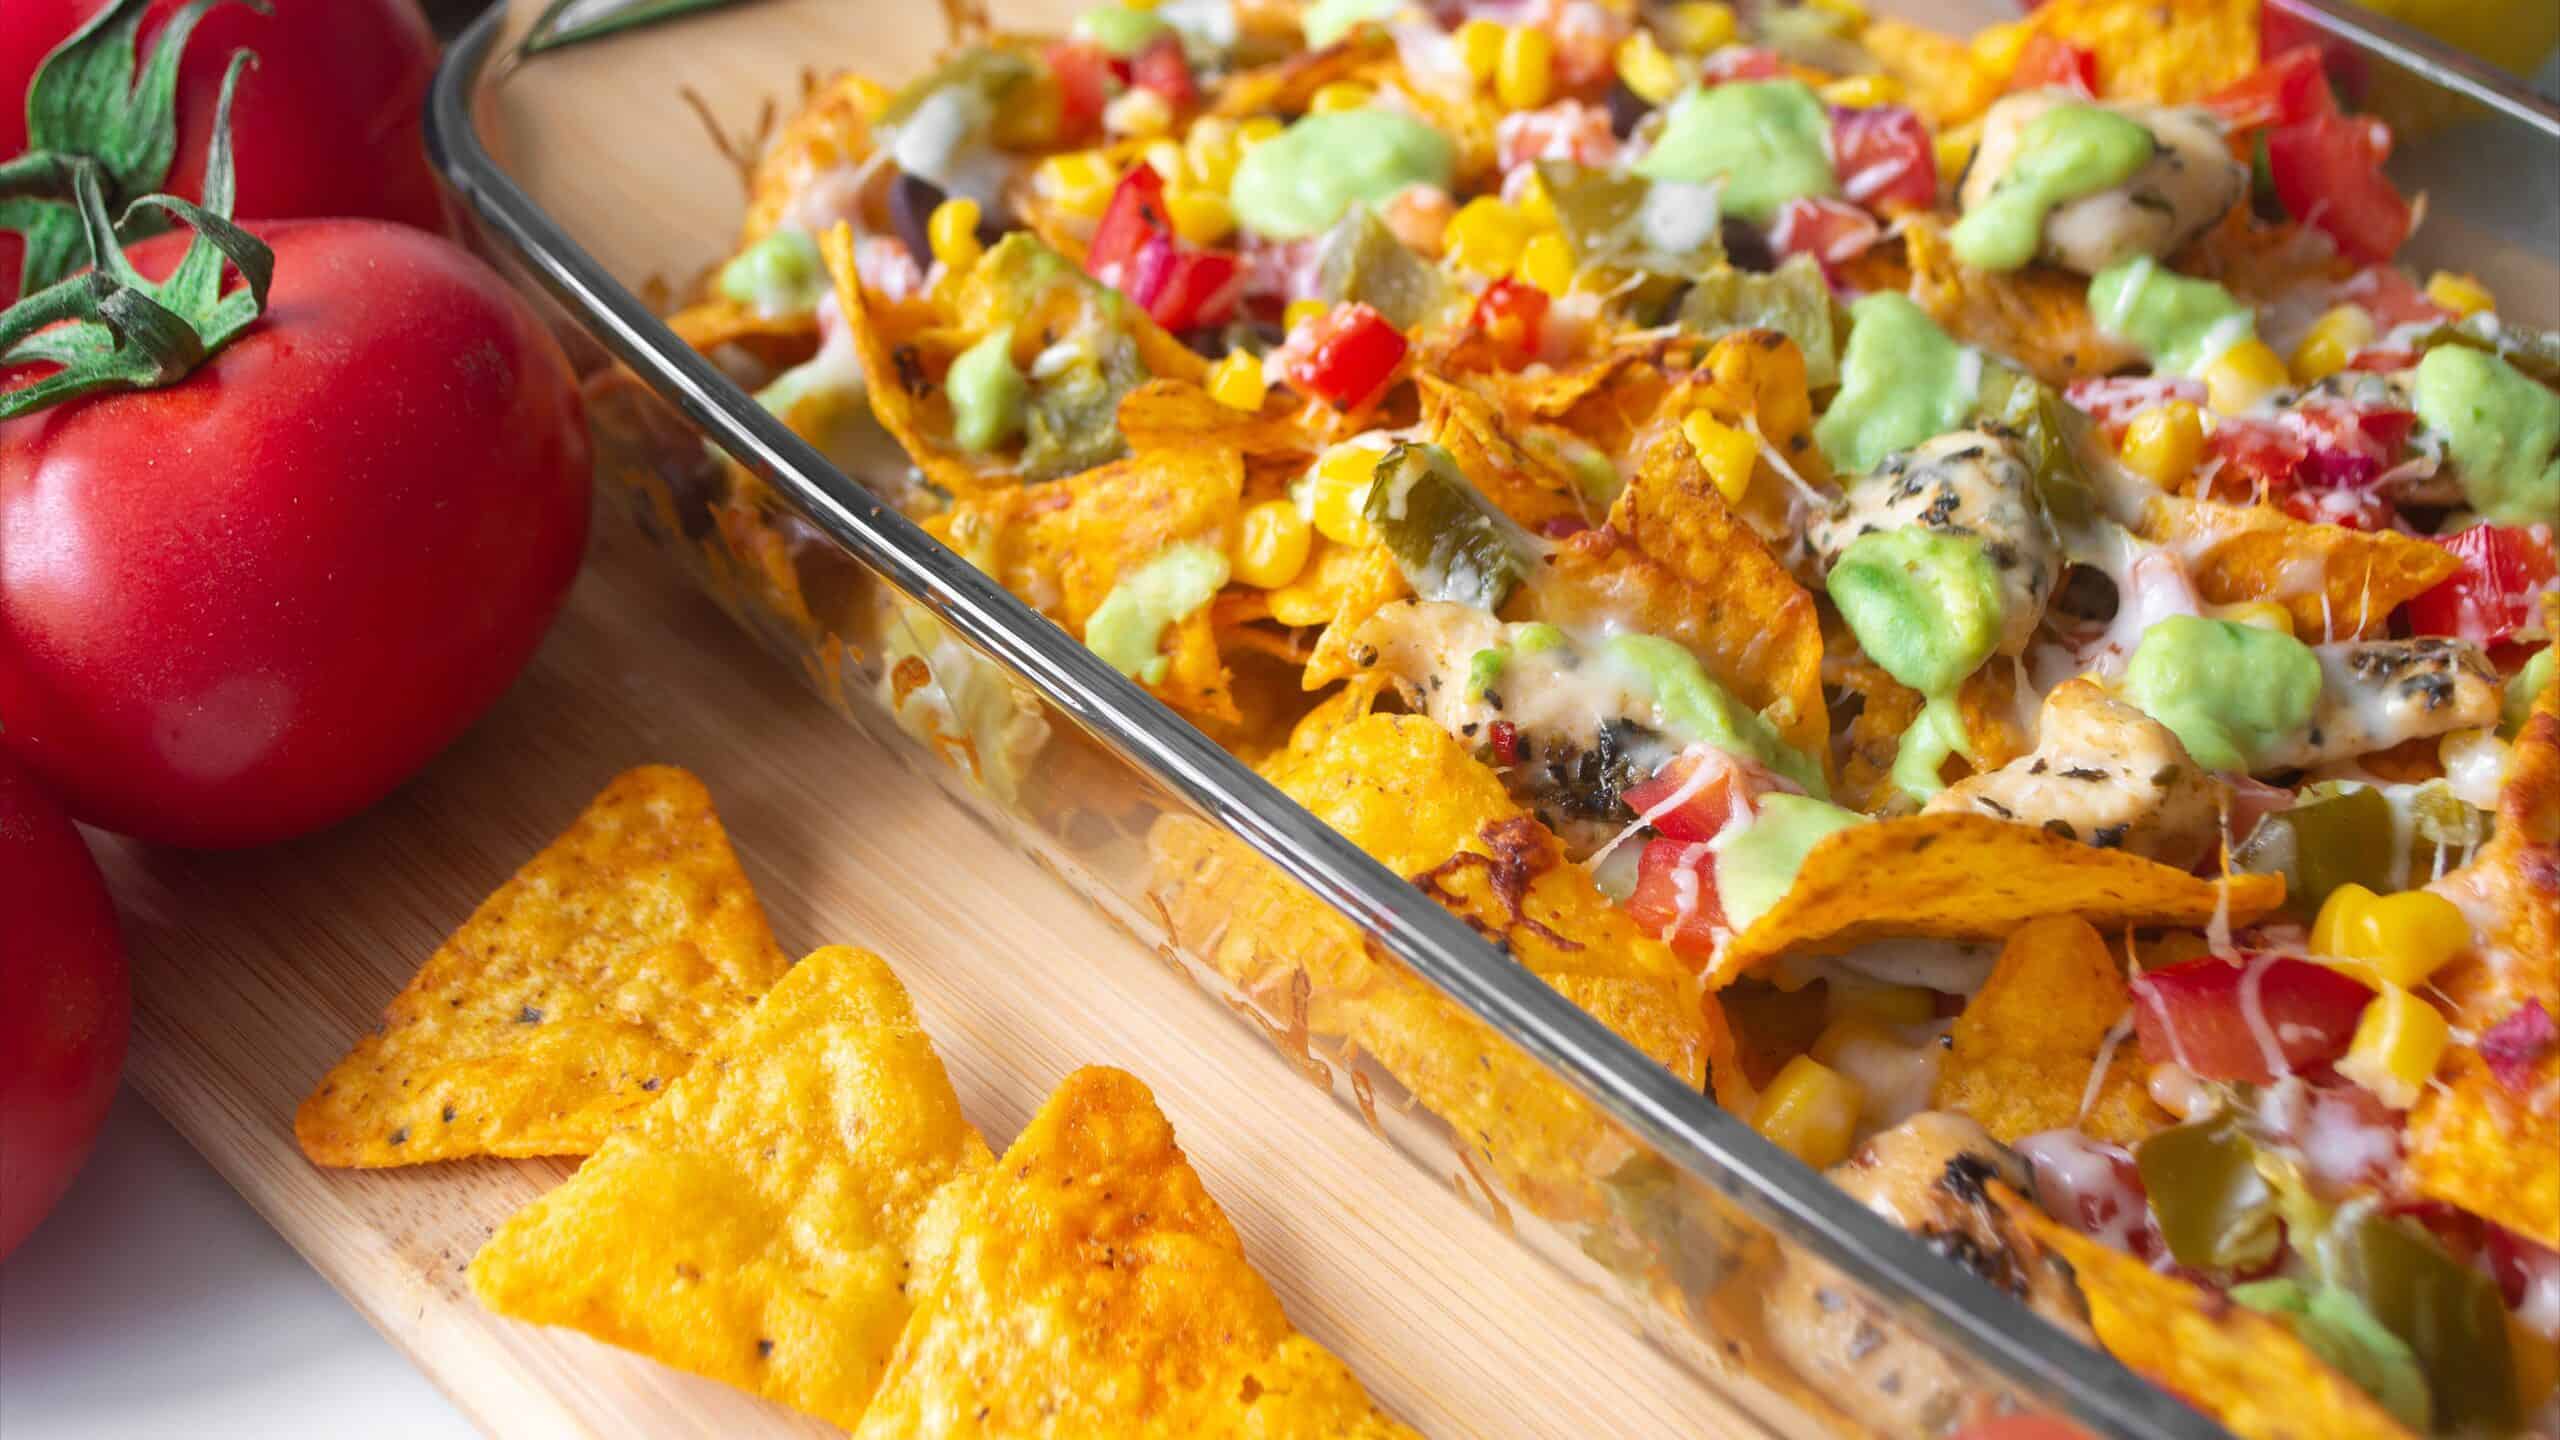 Baked nacho dish in a glass baking pan with corn tortilla chip, pico de gallo salsa, avocado guacamole chipotle, beans, jalapenos and Monterrey jack cheese on a wooden board surrounded by ingredients